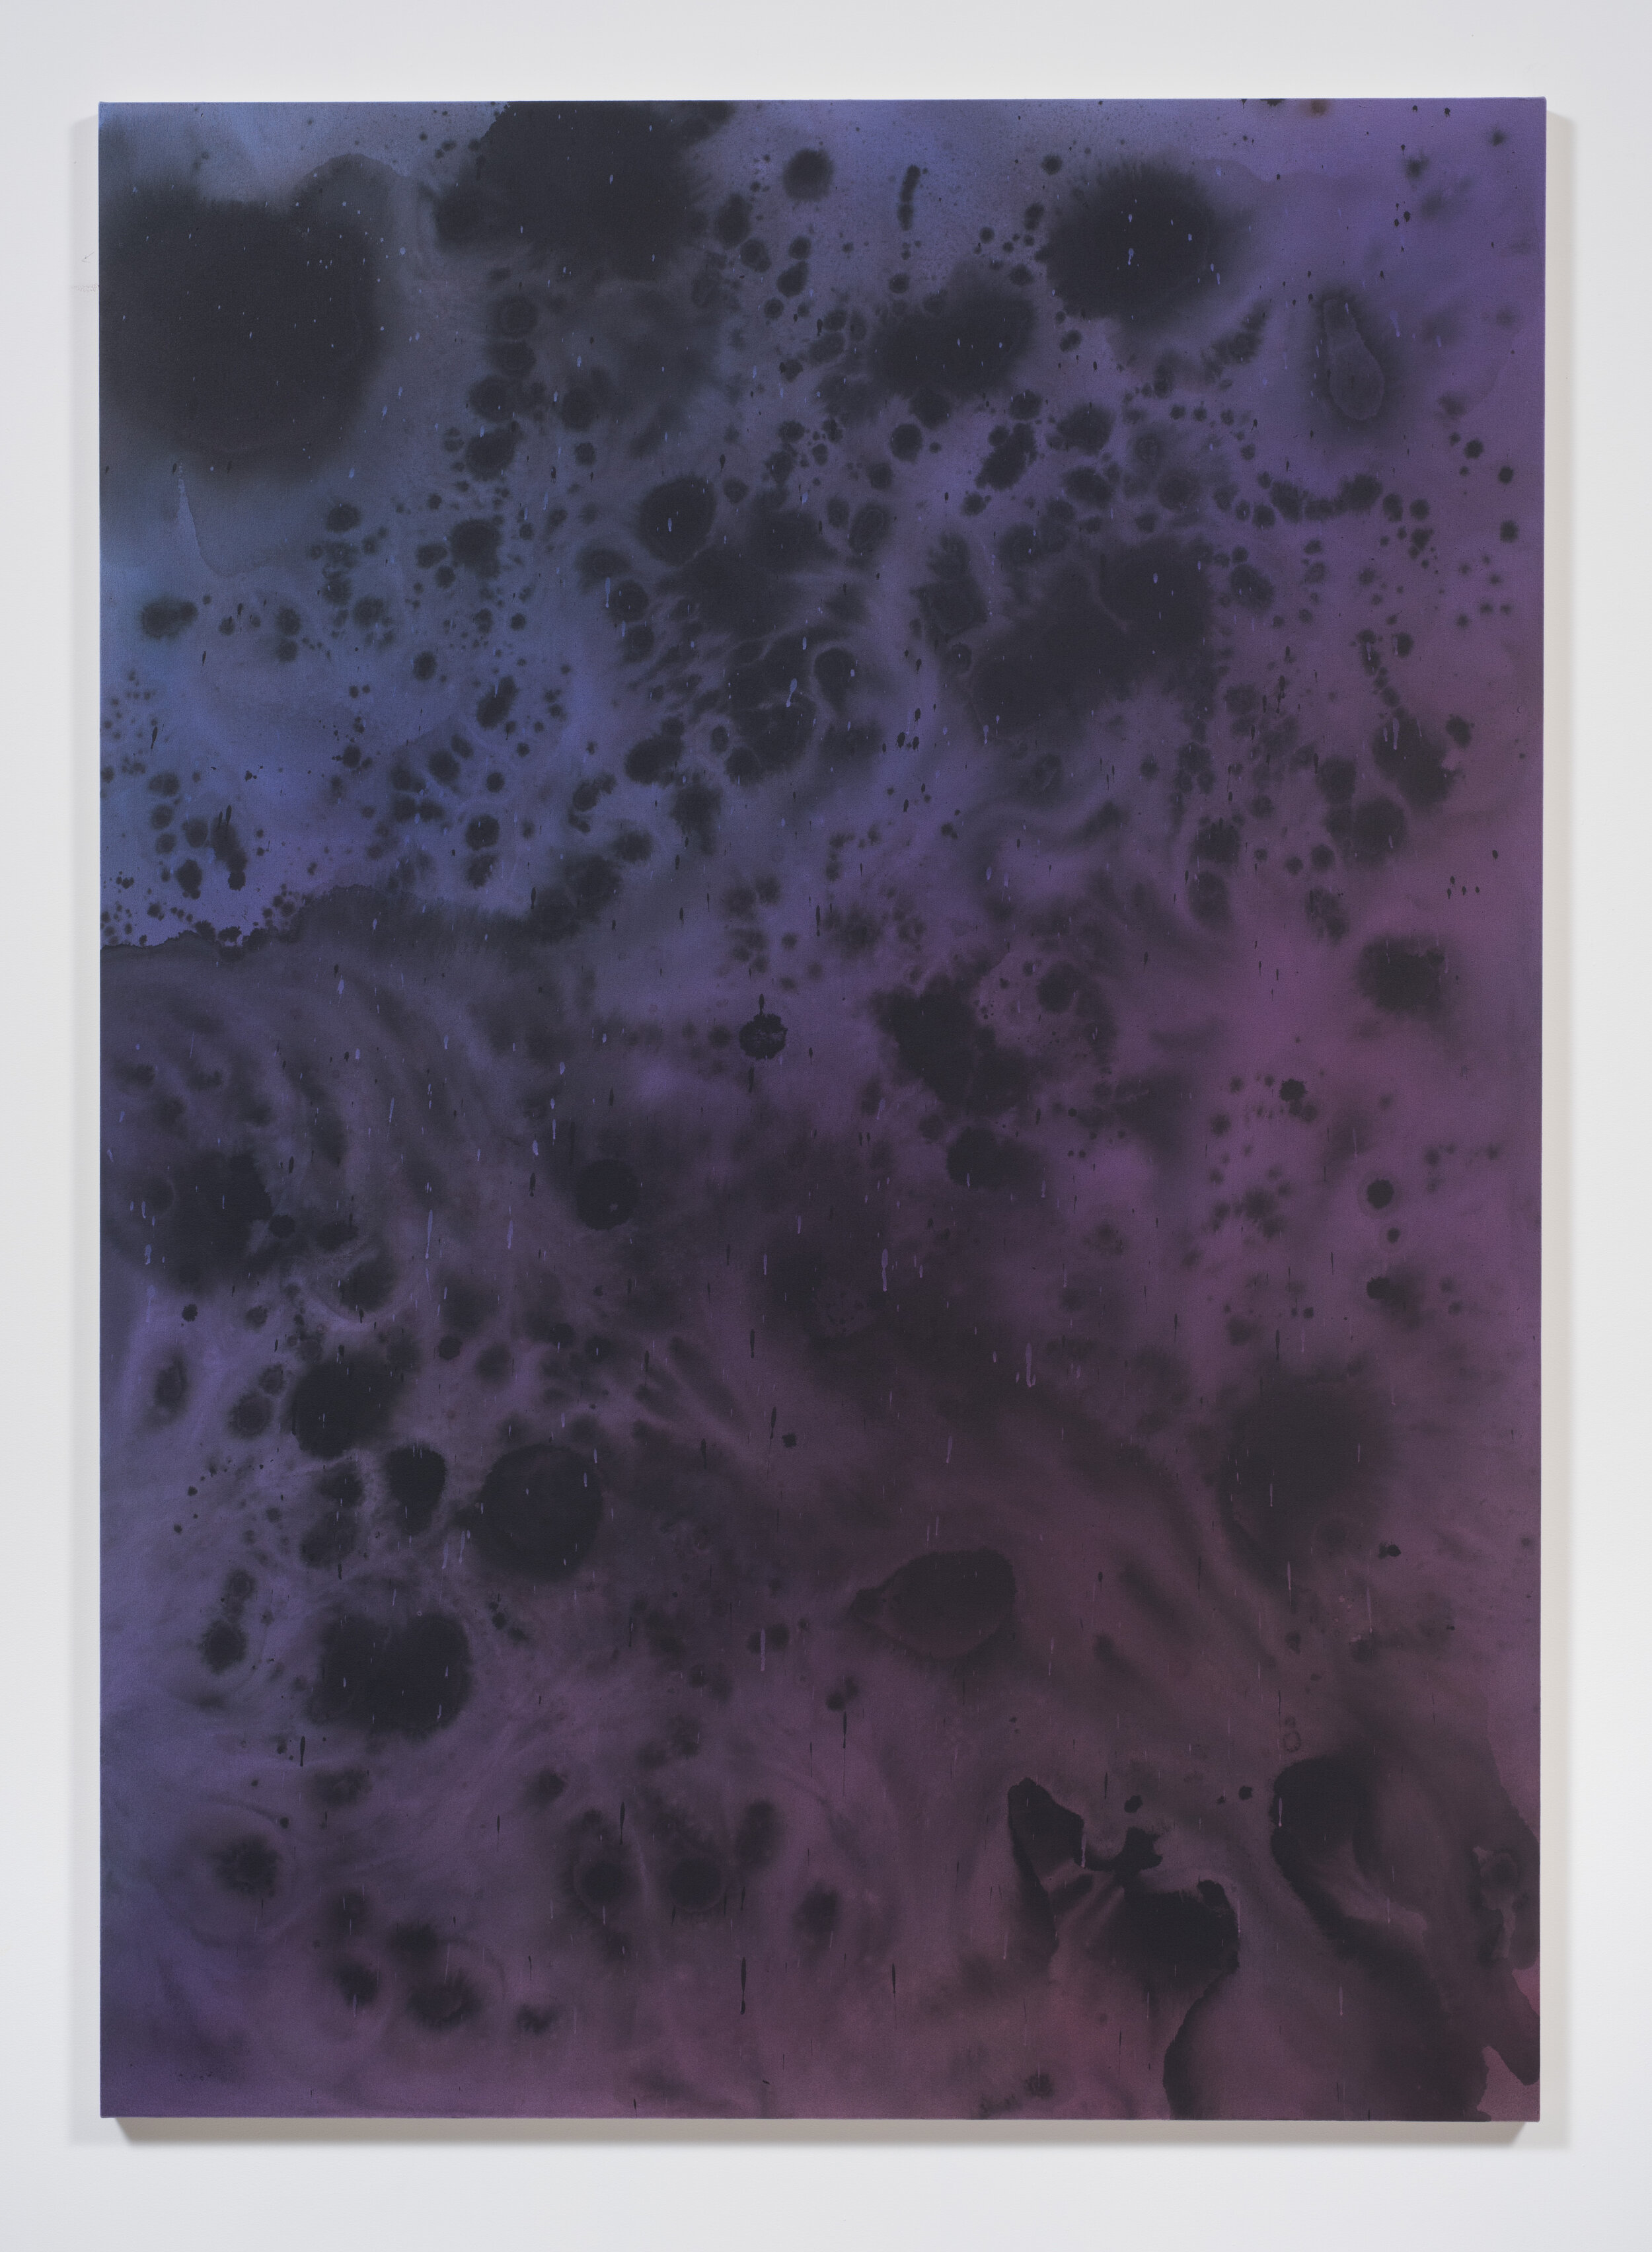   Untitled Painting in Violet over Magenta,  2014. Acrylic on canvas. 84 x 60 inches 